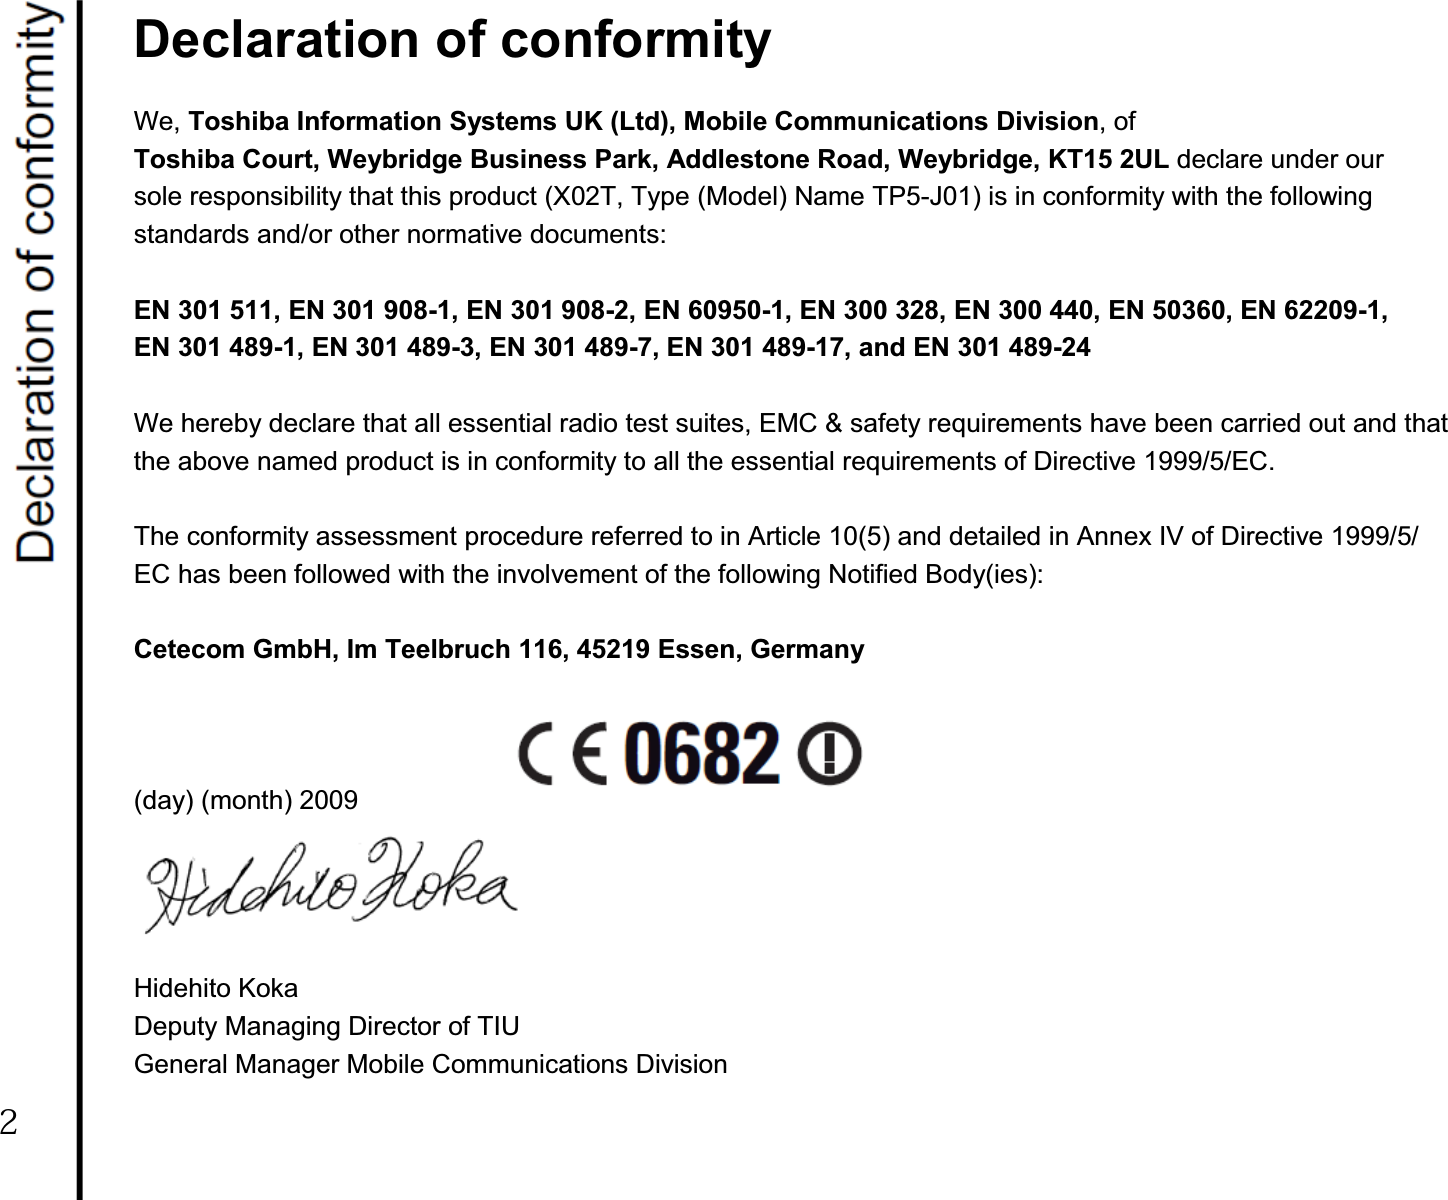 Declaration of conformity We, Toshiba Information Systems UK (Ltd), Mobile Communications Division, of Toshiba Court, Weybridge Business Park, Addlestone Road, Weybridge, KT15 2UL declare under our sole responsibility that this product (X02T, Type (Model) Name TP5-J01) is in conformity with the following standards and/or other normative documents: EN 301 511, EN 301 908-1, EN 301 908-2, EN 60950-1, EN 300 328, EN 300 440, EN 50360, EN 62209-1, EN 301 489-1, EN 301 489-3, EN 301 489-7, EN 301 489-17, and EN 301 489-24 We hereby declare that all essential radio test suites, EMC &amp; safety requirements have been carried out and that the above named product is in conformity to all the essential requirements of Directive 1999/5/EC. The conformity assessment procedure referred to in Article 10(5) and detailed in Annex IV of Directive 1999/5/ EC has been followed with the involvement of the following Notified Body(ies): Cetecom GmbH, Im Teelbruch 116, 45219 Essen, Germany (day) (month) 2009 Hidehito Koka Deputy Managing Director of TIU General Manager Mobile Communications Division2